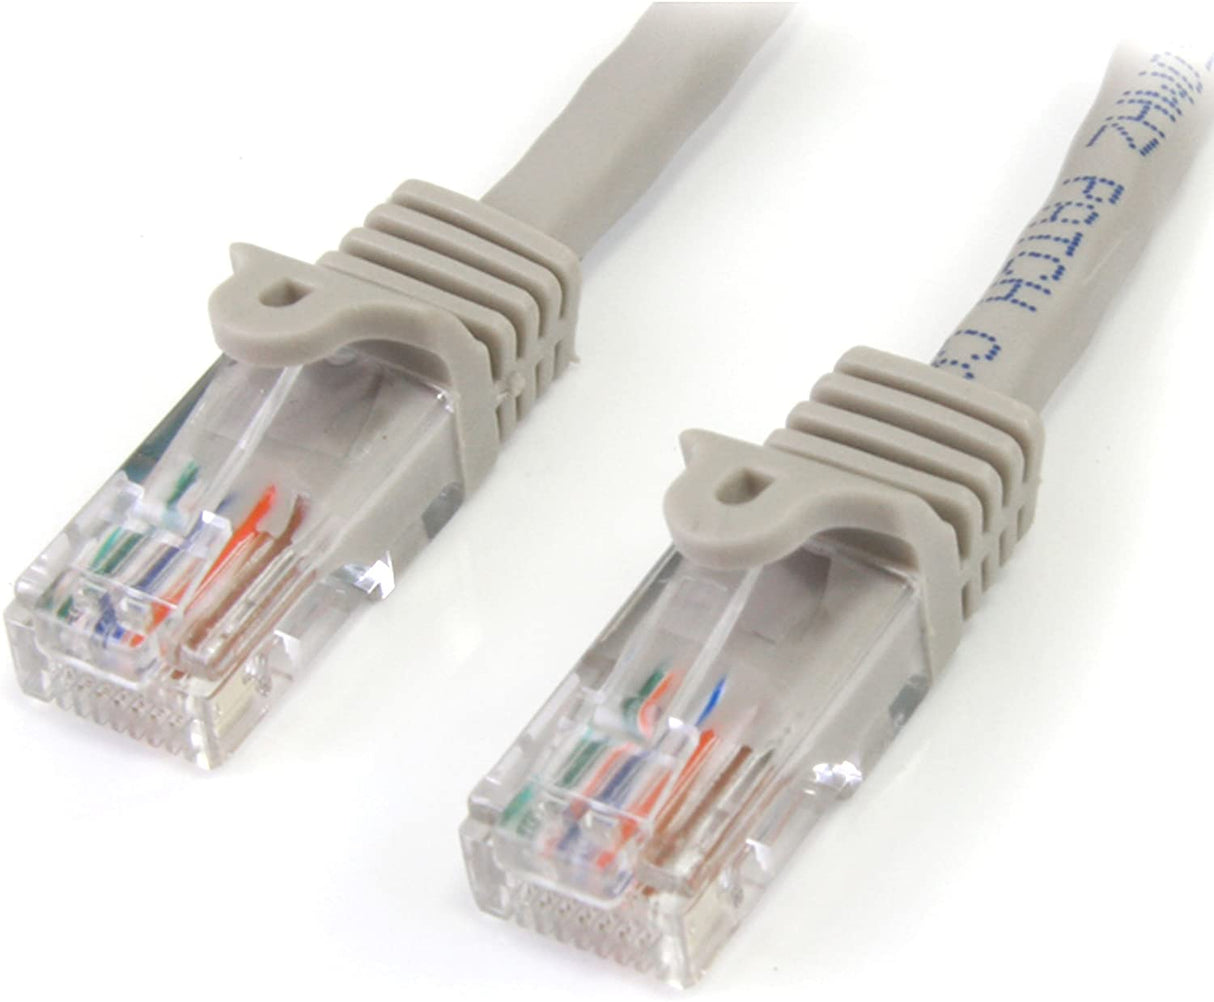 StarTech.com Cat5e Ethernet Cable - 3 ft - Gray- Patch Cable - Snagless Cat5e Cable - Short Network Cable - Ethernet Cord - Cat 5e Cable - 3ft (45PATCH3GR) 3 ft / 1m Grey